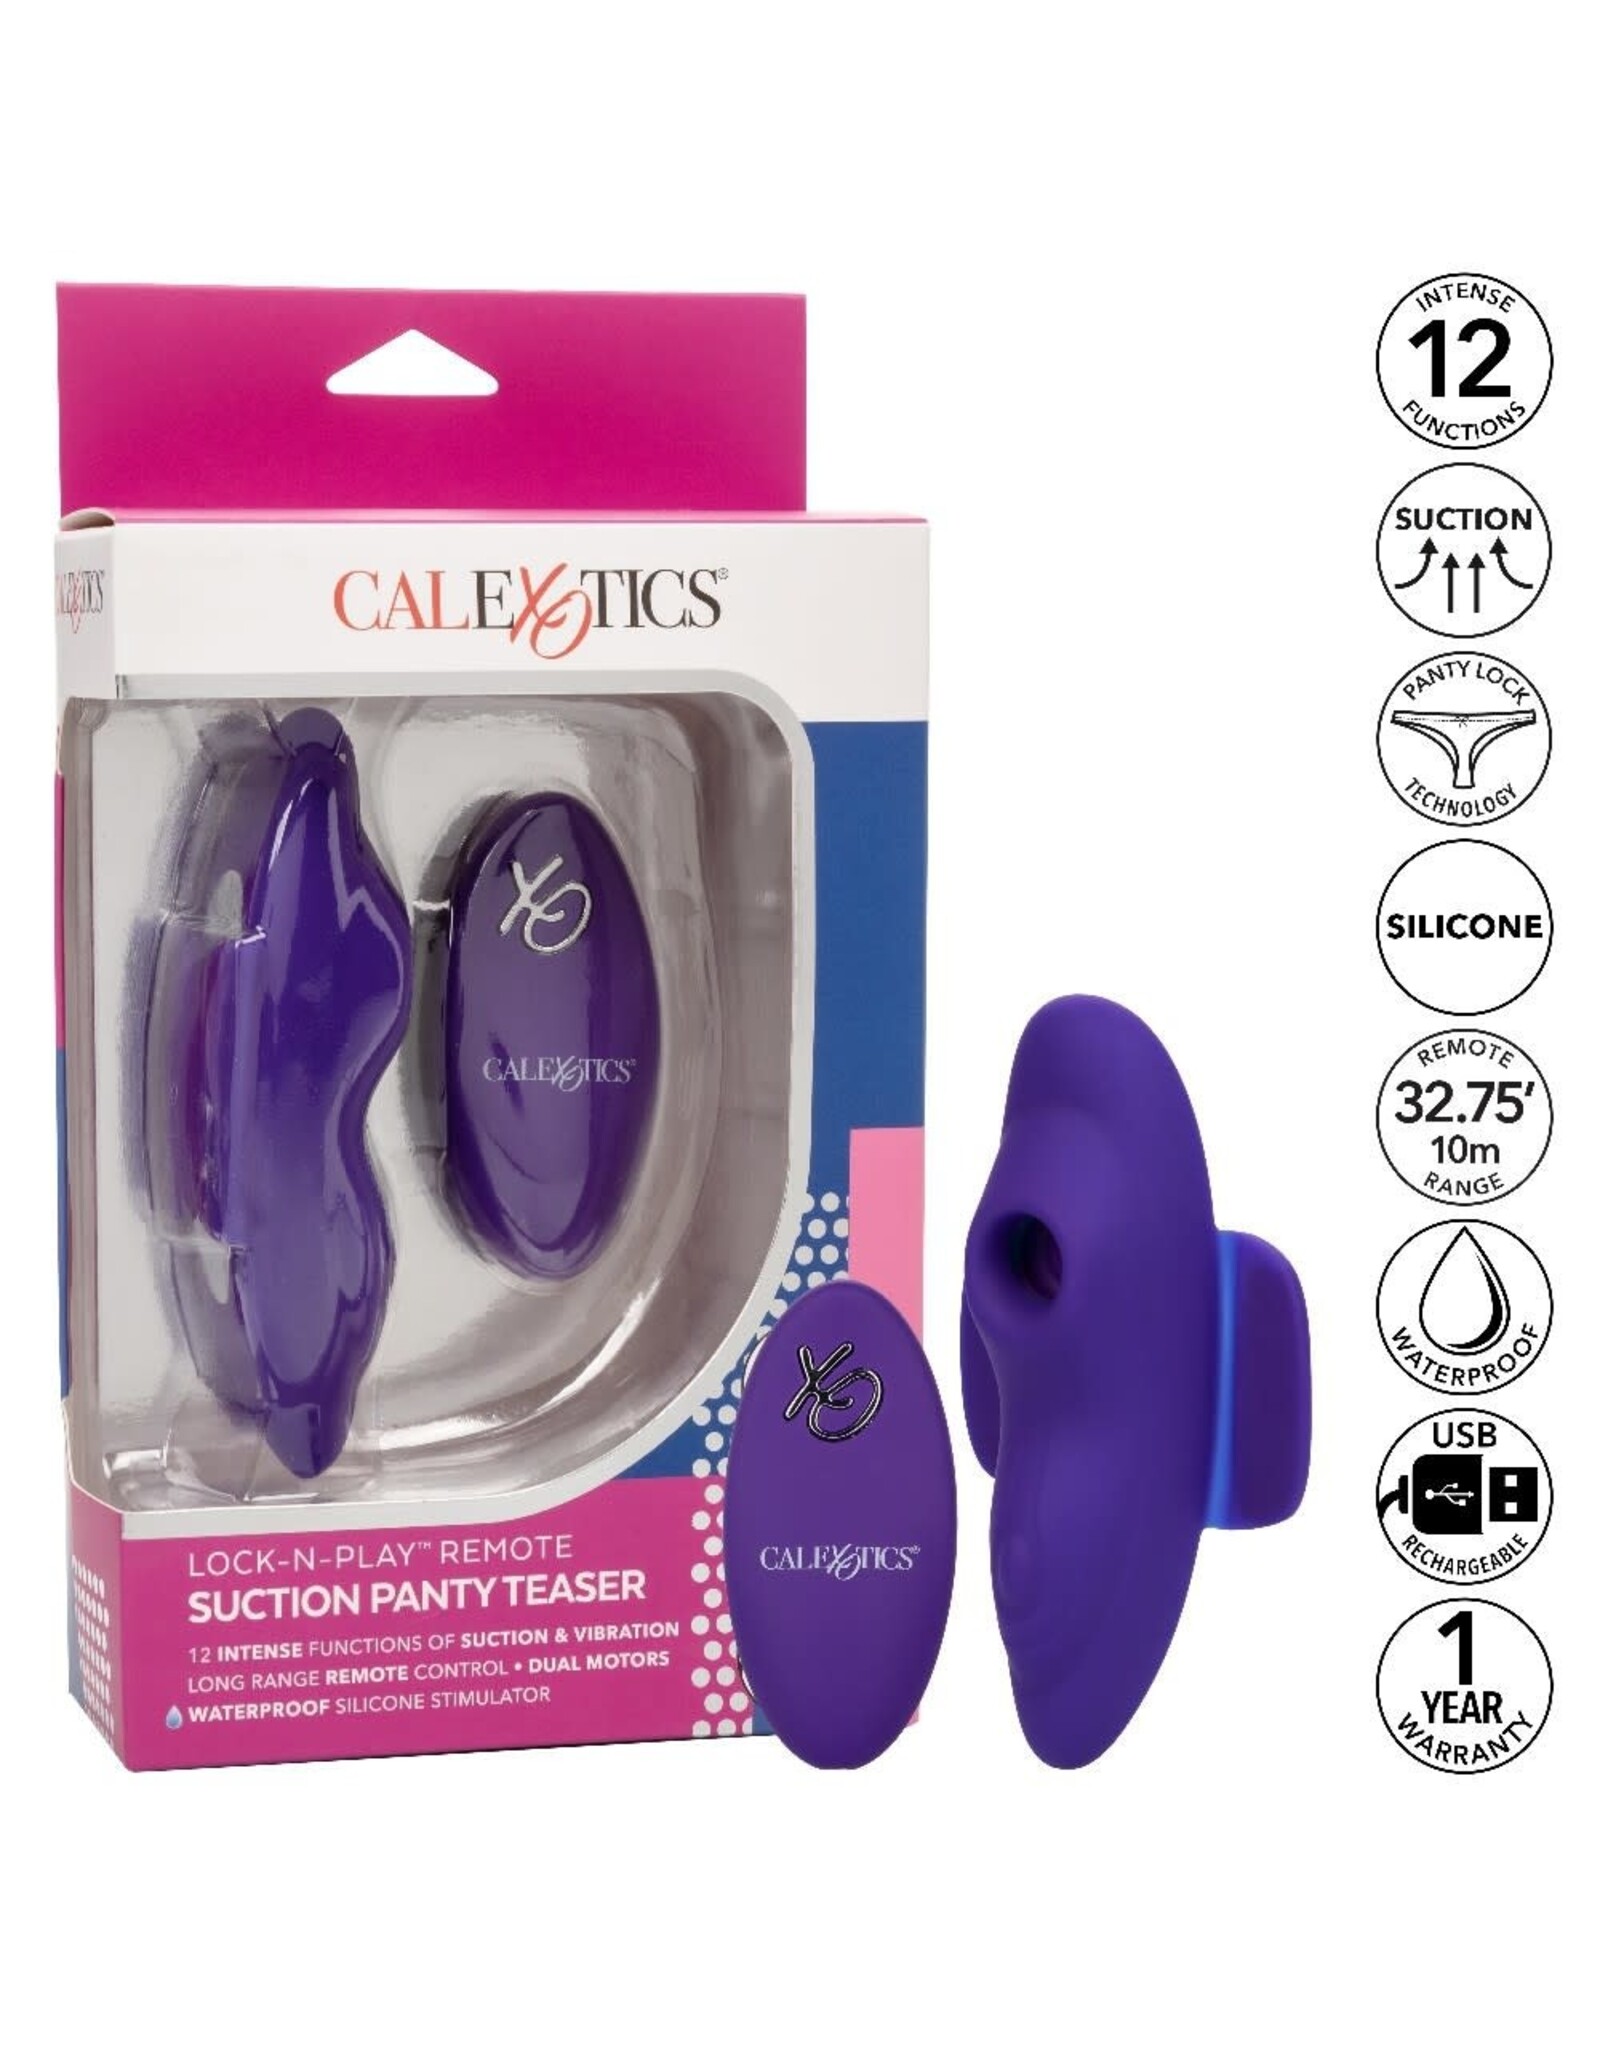 Calexotics Lock-N-Play Remote Suction Panty Teaser - Blue